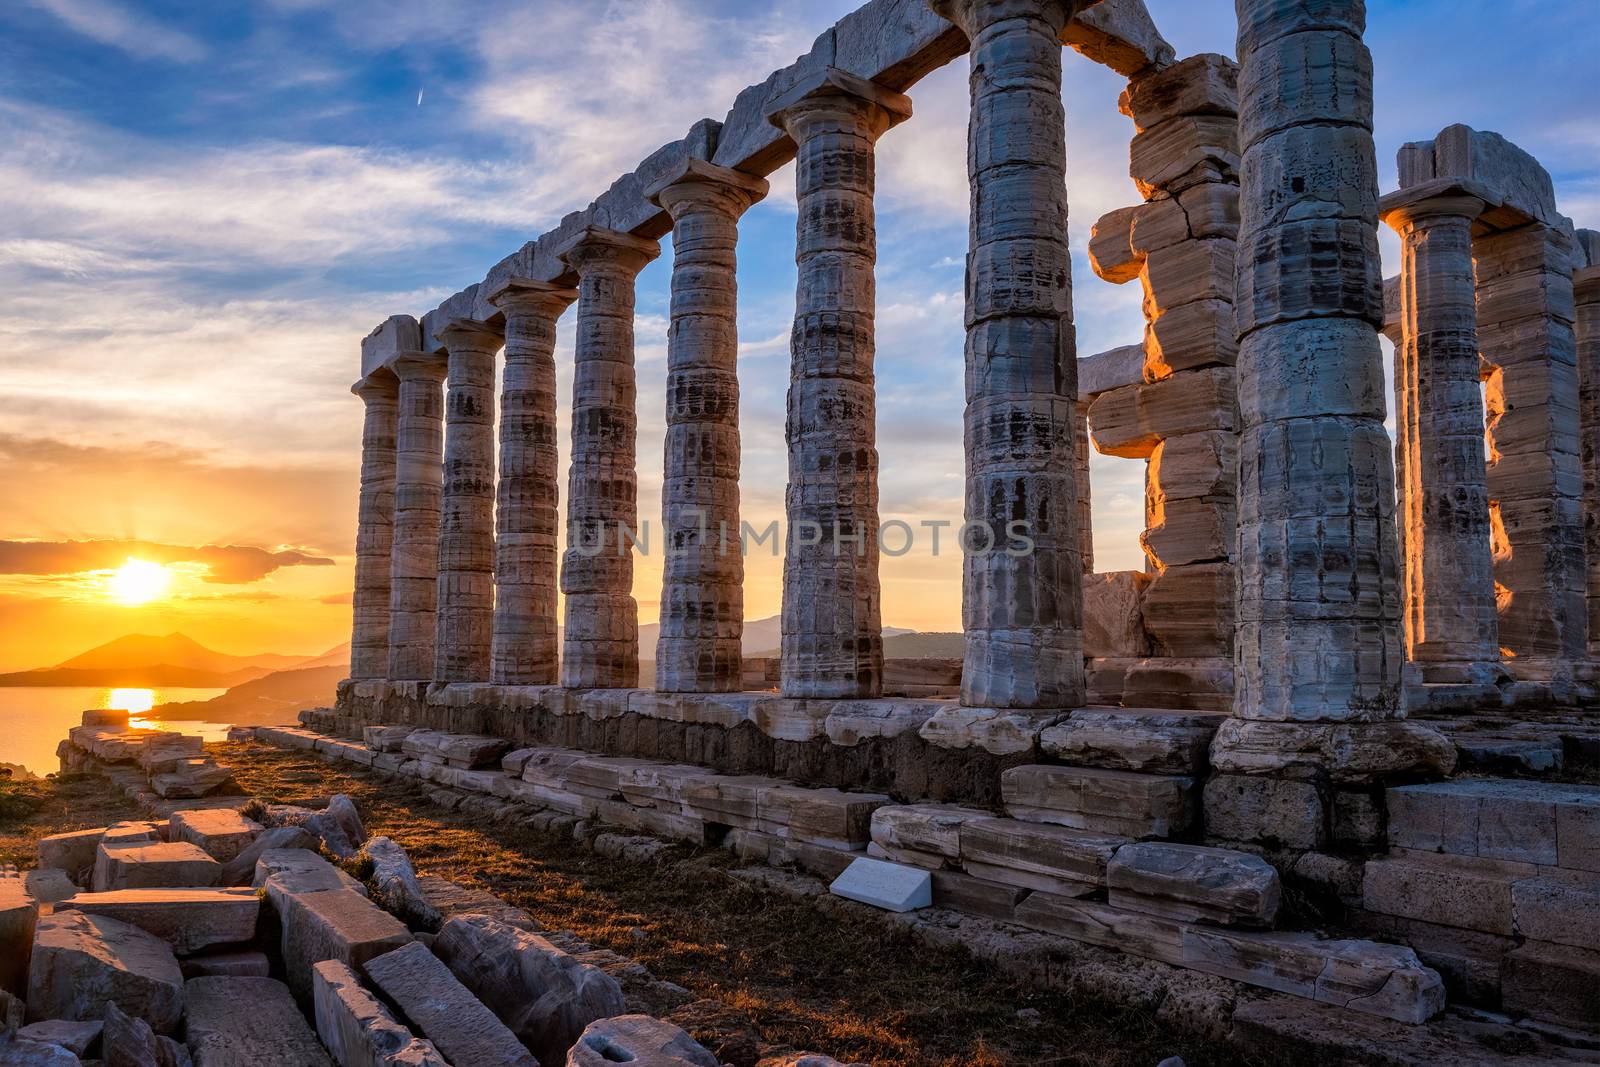 Cape Sounio sunset at Sounion with ruins of the iconic Poseidon temple. One of the Twelve Olympian Gods of ancient Greek religion and mythology. God of the sea, earthquakes. Aegean coast, Greece.